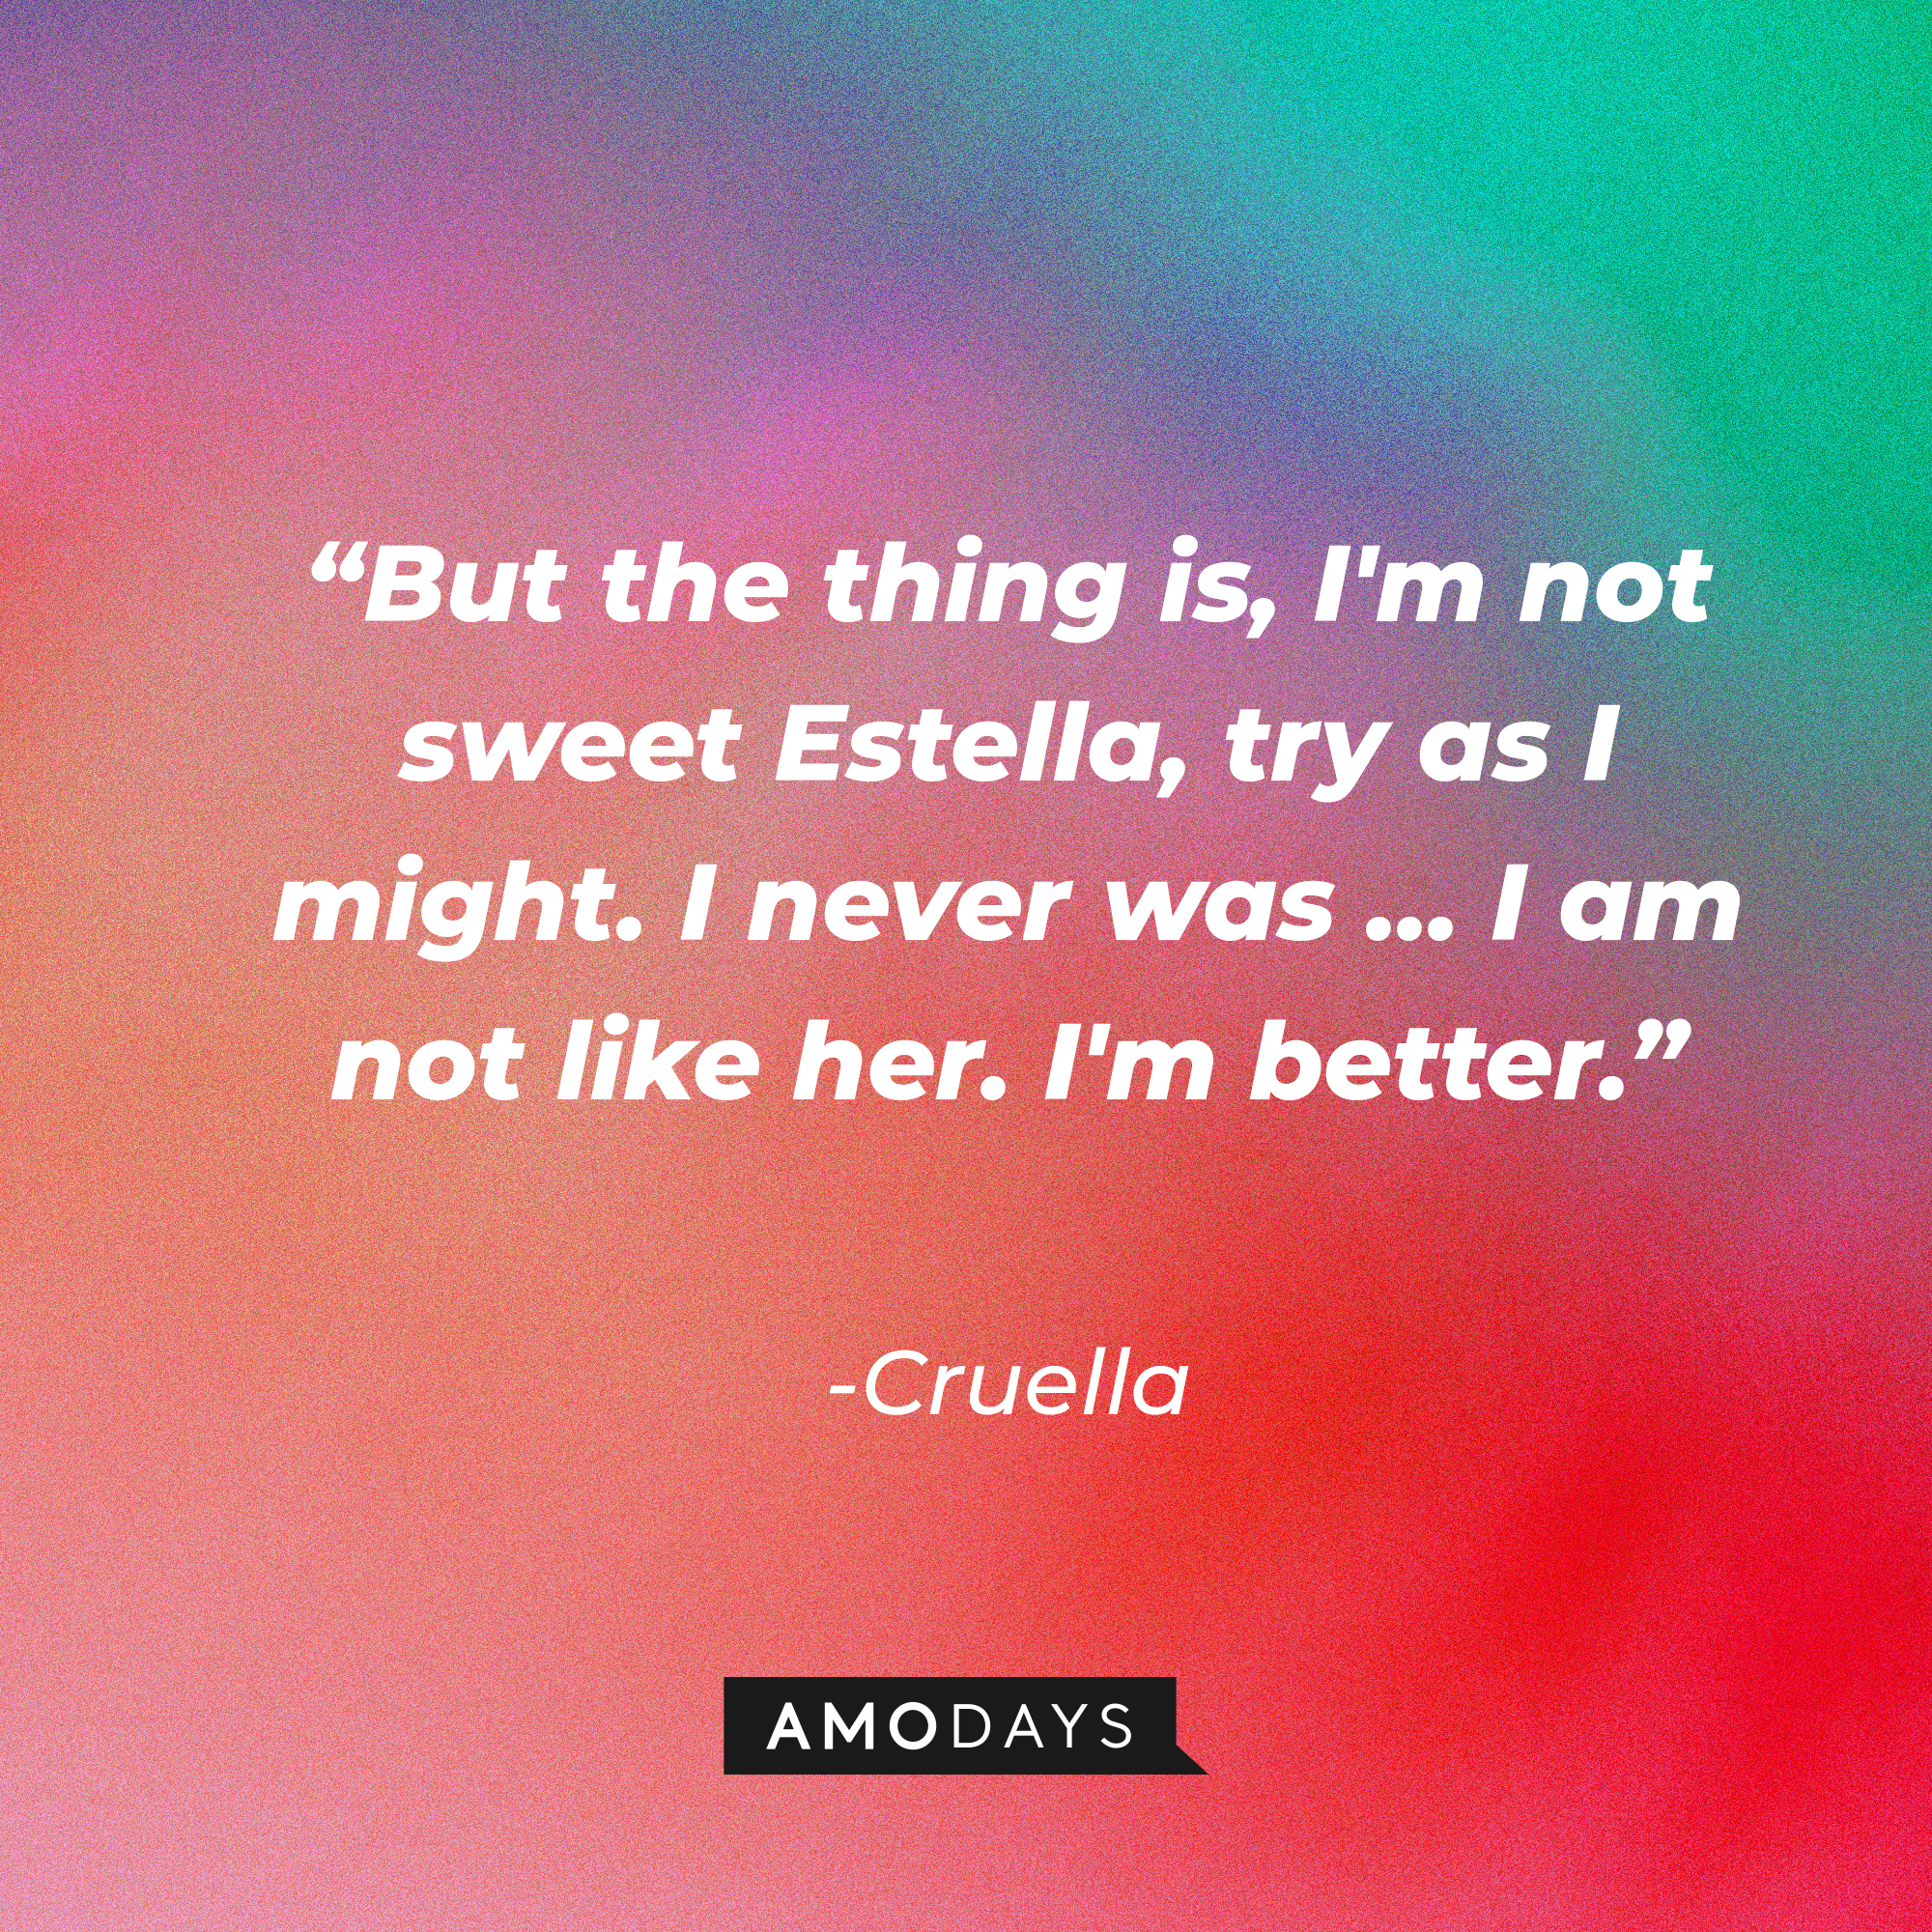 Cruella's quote: "But the thing is, I'm not sweet Estella, try as I might. I never was … I am not like her. I'm better.” | Source: Amodays